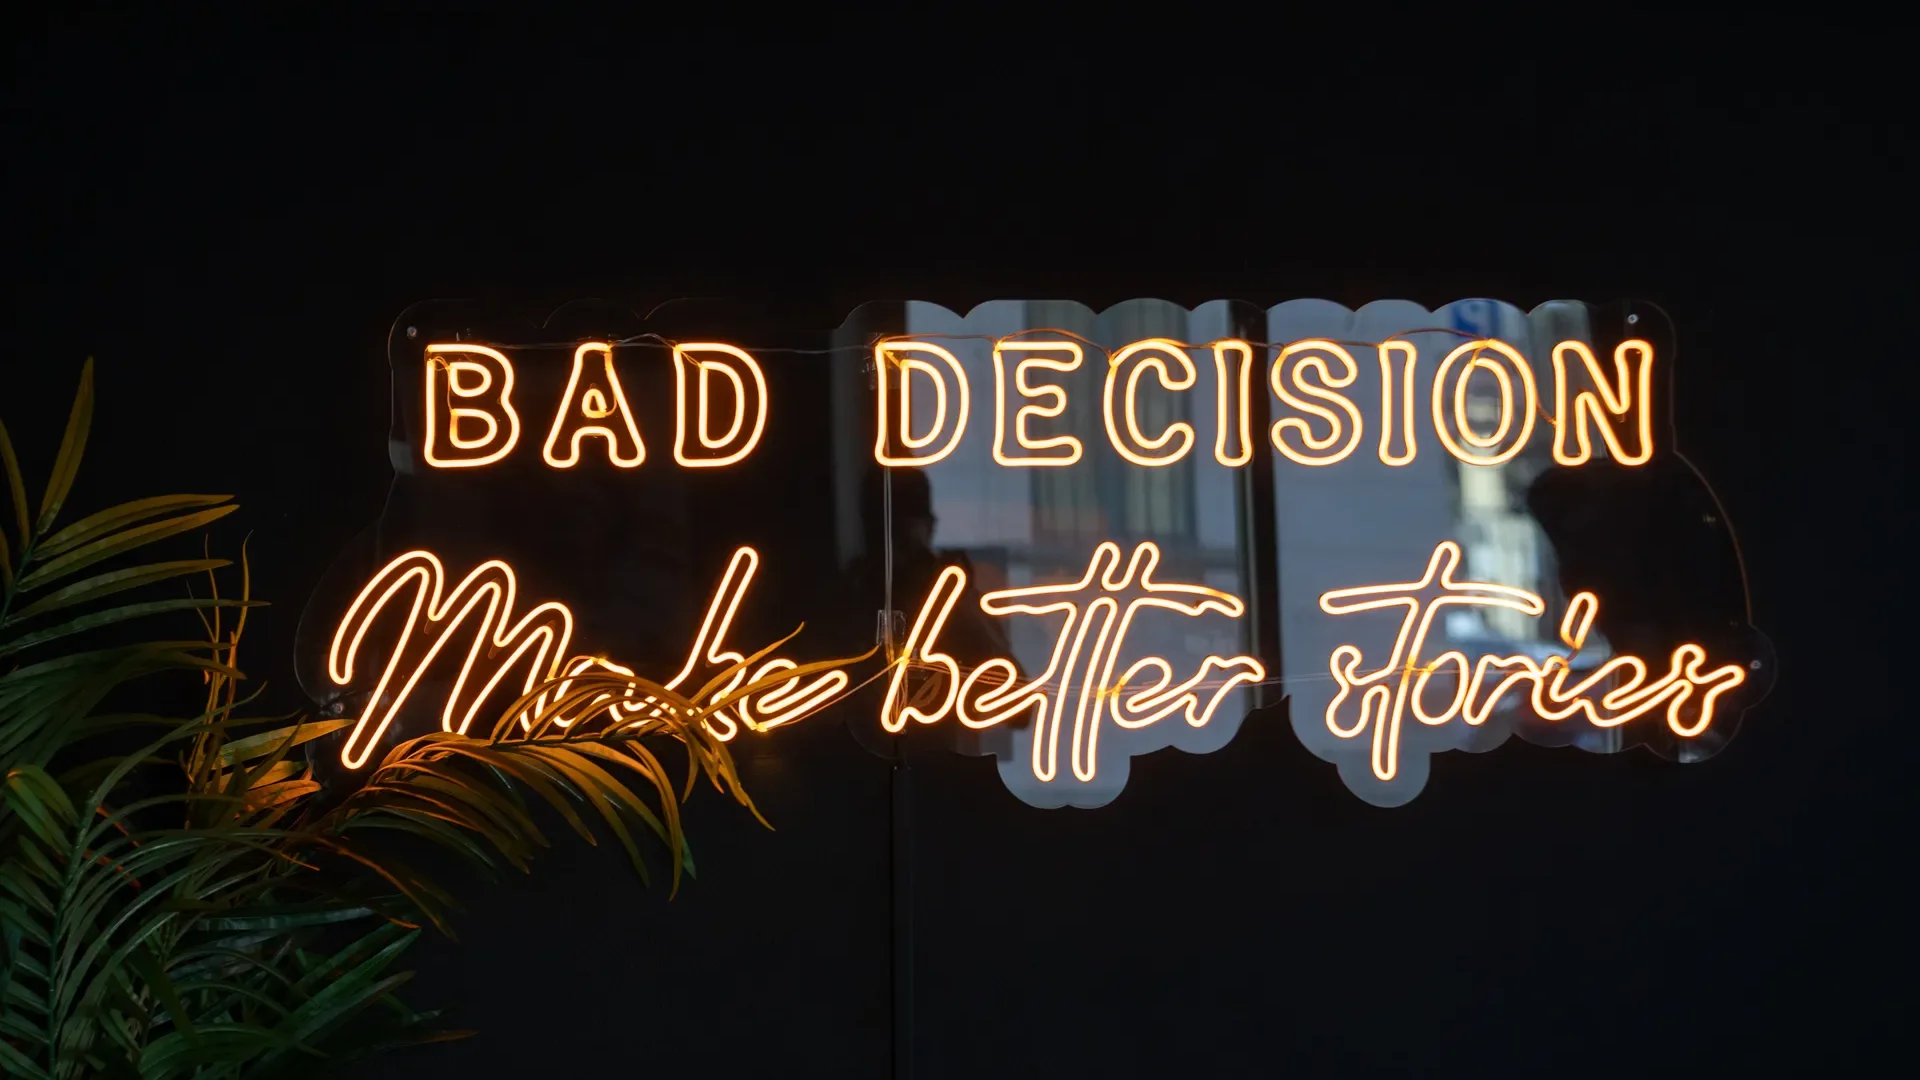 Bad decision made better stories